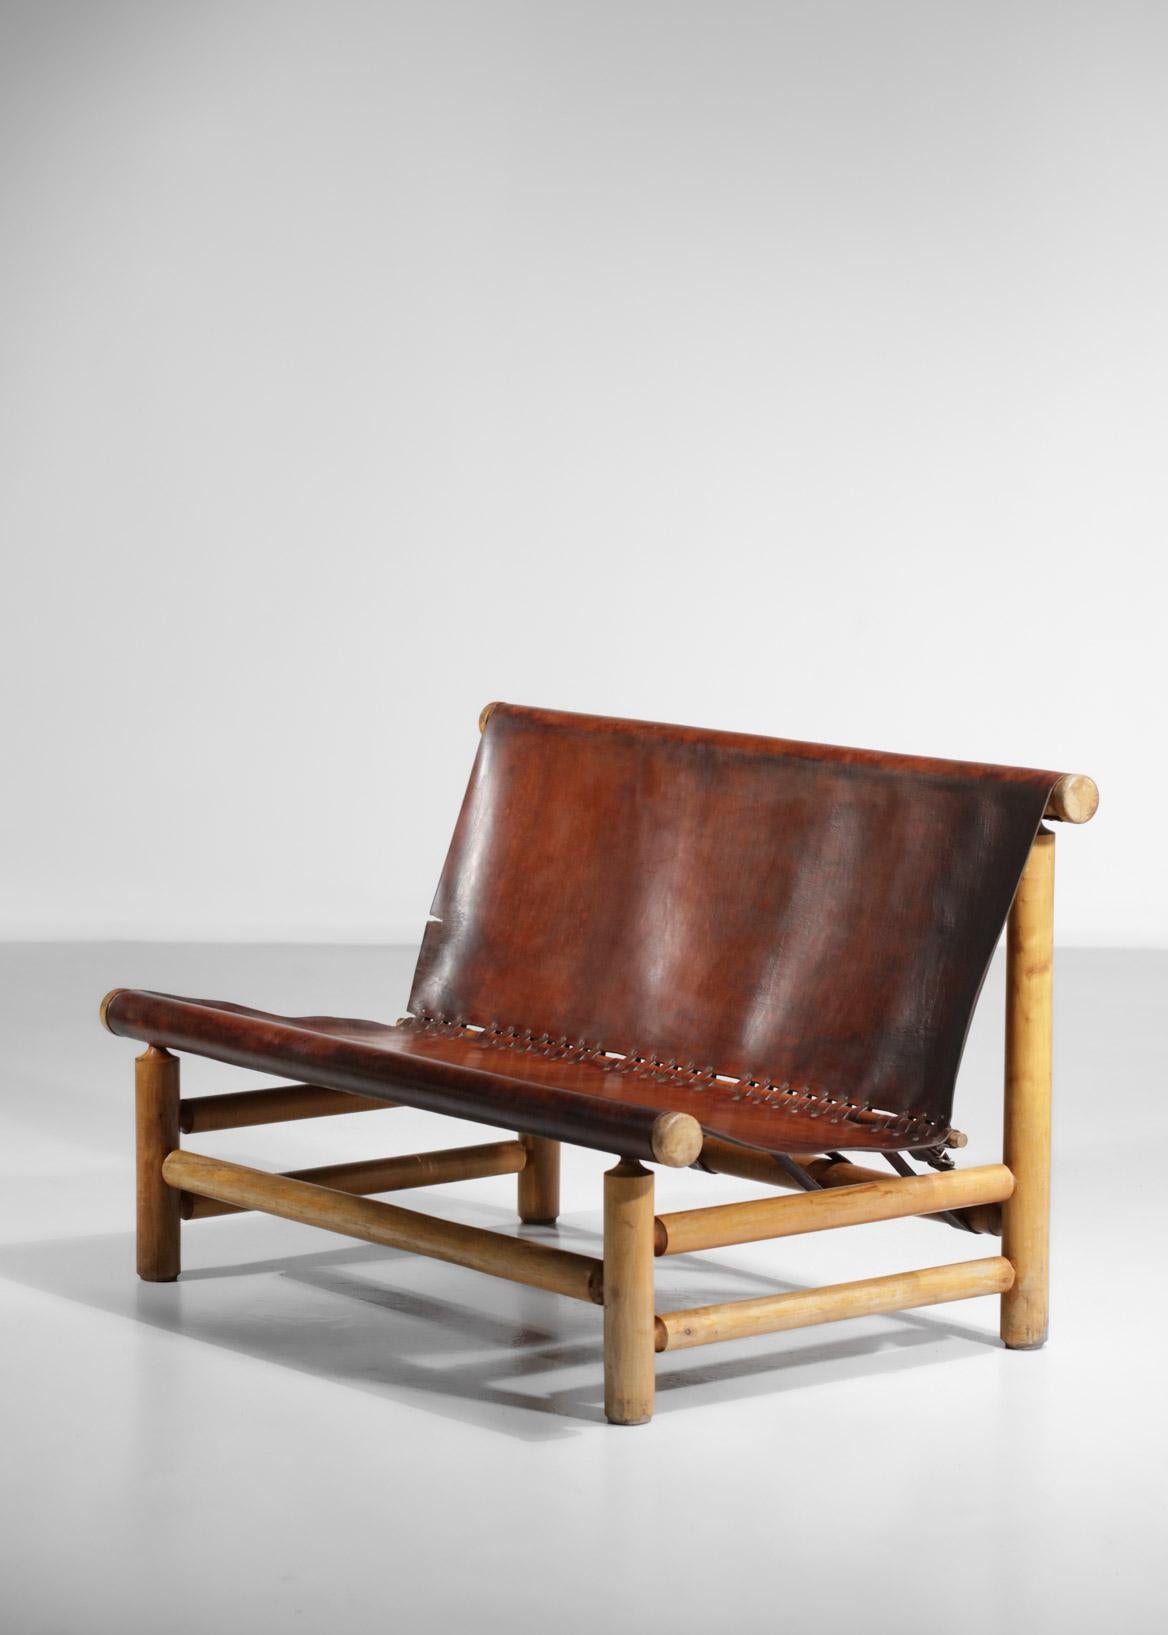 Very original bench from the 50's / 60's reminding the work of Charlotte Periand or Ilmarii Tapiovaraa. Structure in solid pine, seat and back in strapped cognac leather. Very nice patina of time on the leather which has been cleaned and rehydrated,